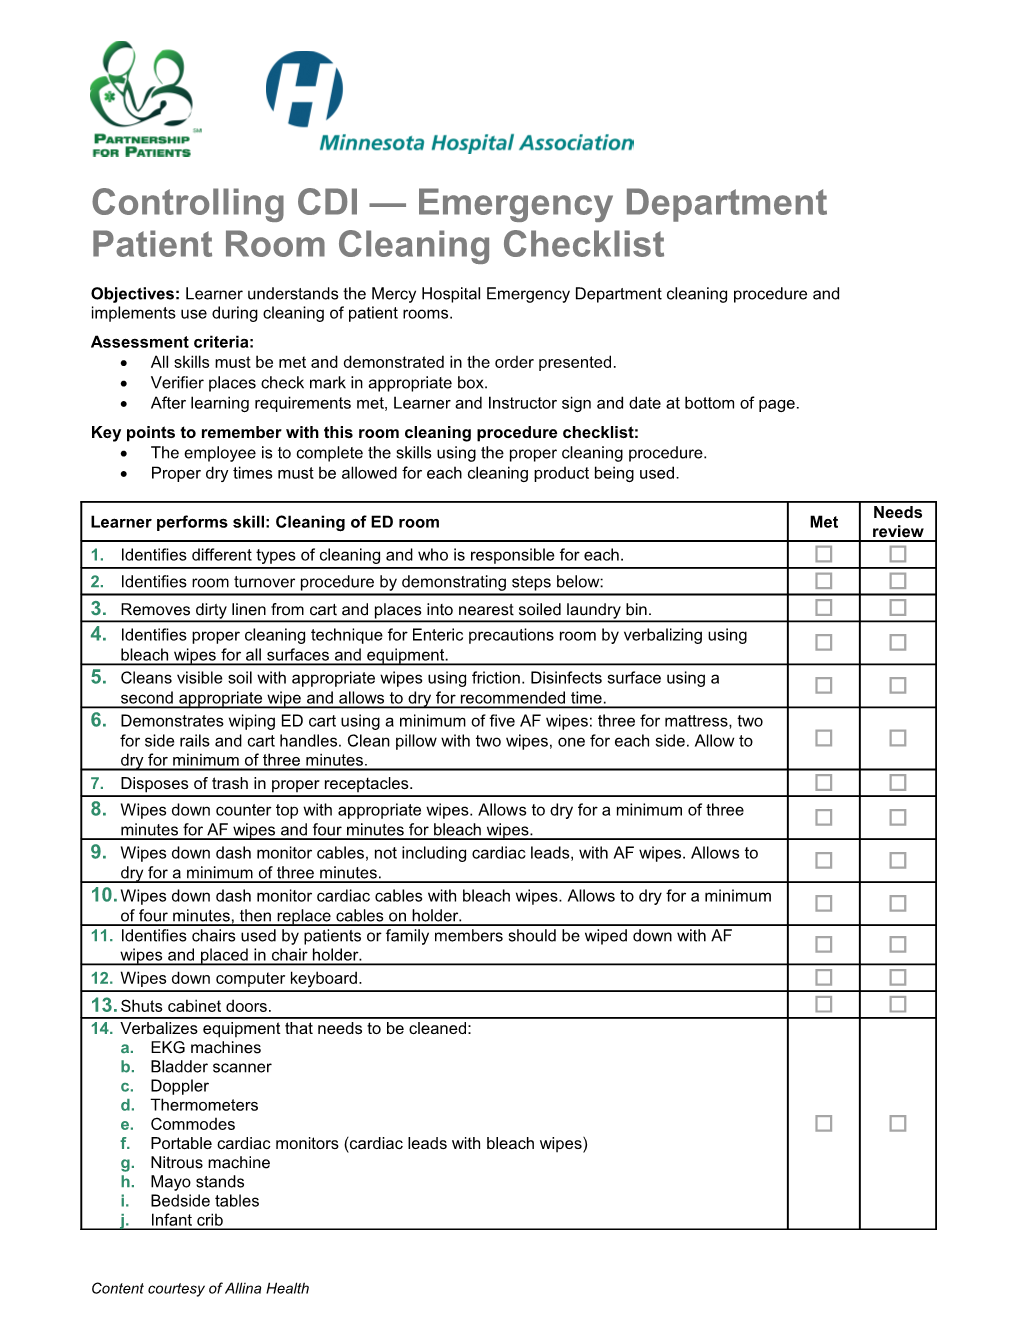 Controlling CDI Emergency Departmentpatient Room Cleaning Checklist